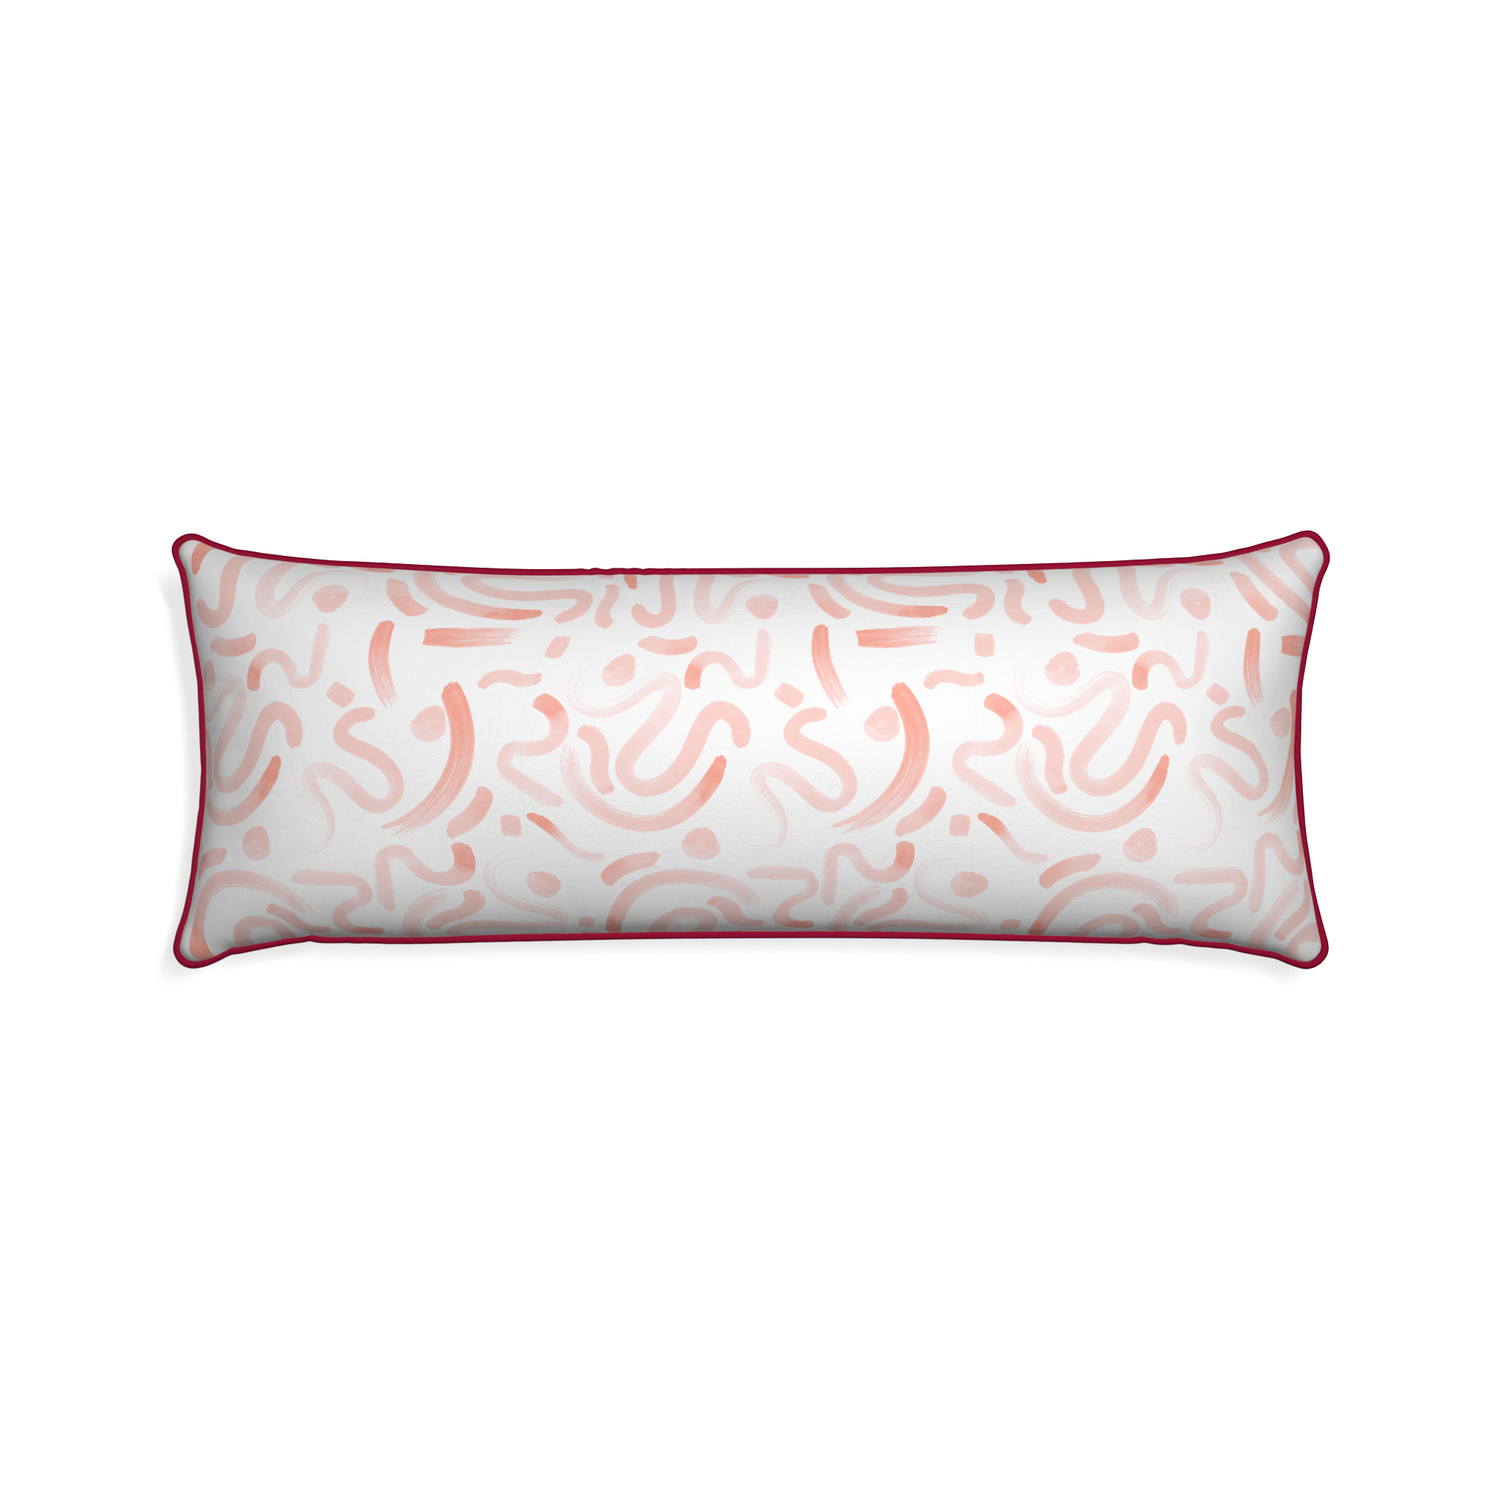 Xl-lumbar hockney pink custom pink graphicpillow with raspberry piping on white background